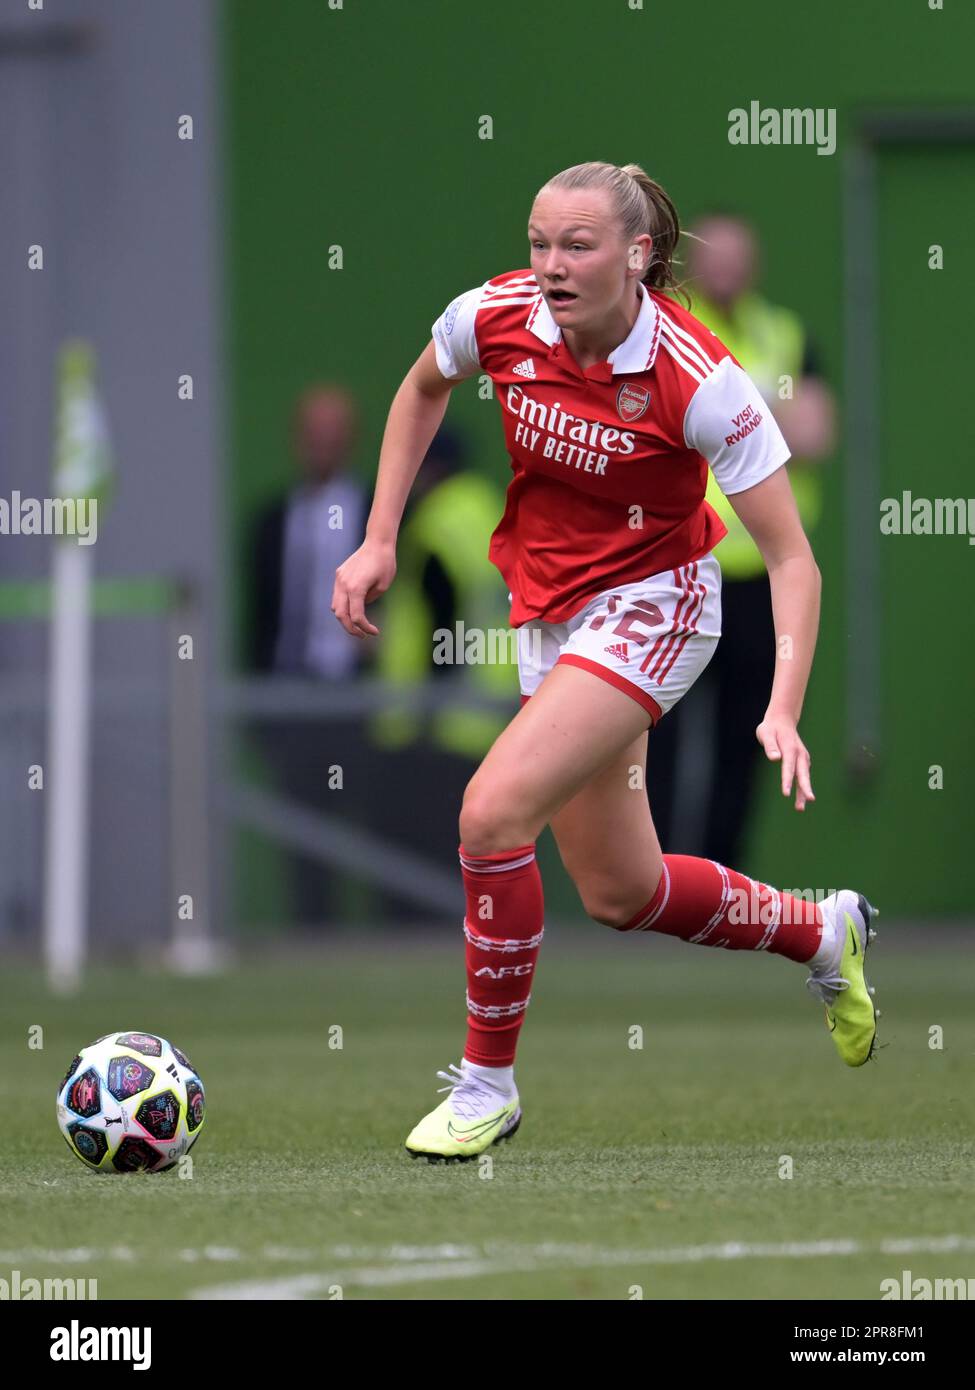 WOLFSBURG - Frida Maanum of Arsenal WFC during the UEFA Champions League Women's Semifinal match between VFL Wolfsburg and Arsenal WFC at VFL Wolfsburg Arena on April 23, 2023 in Wolfsburg, Germany. AP | Dutch Height | GERRIT OF COLOGNE Stock Photo